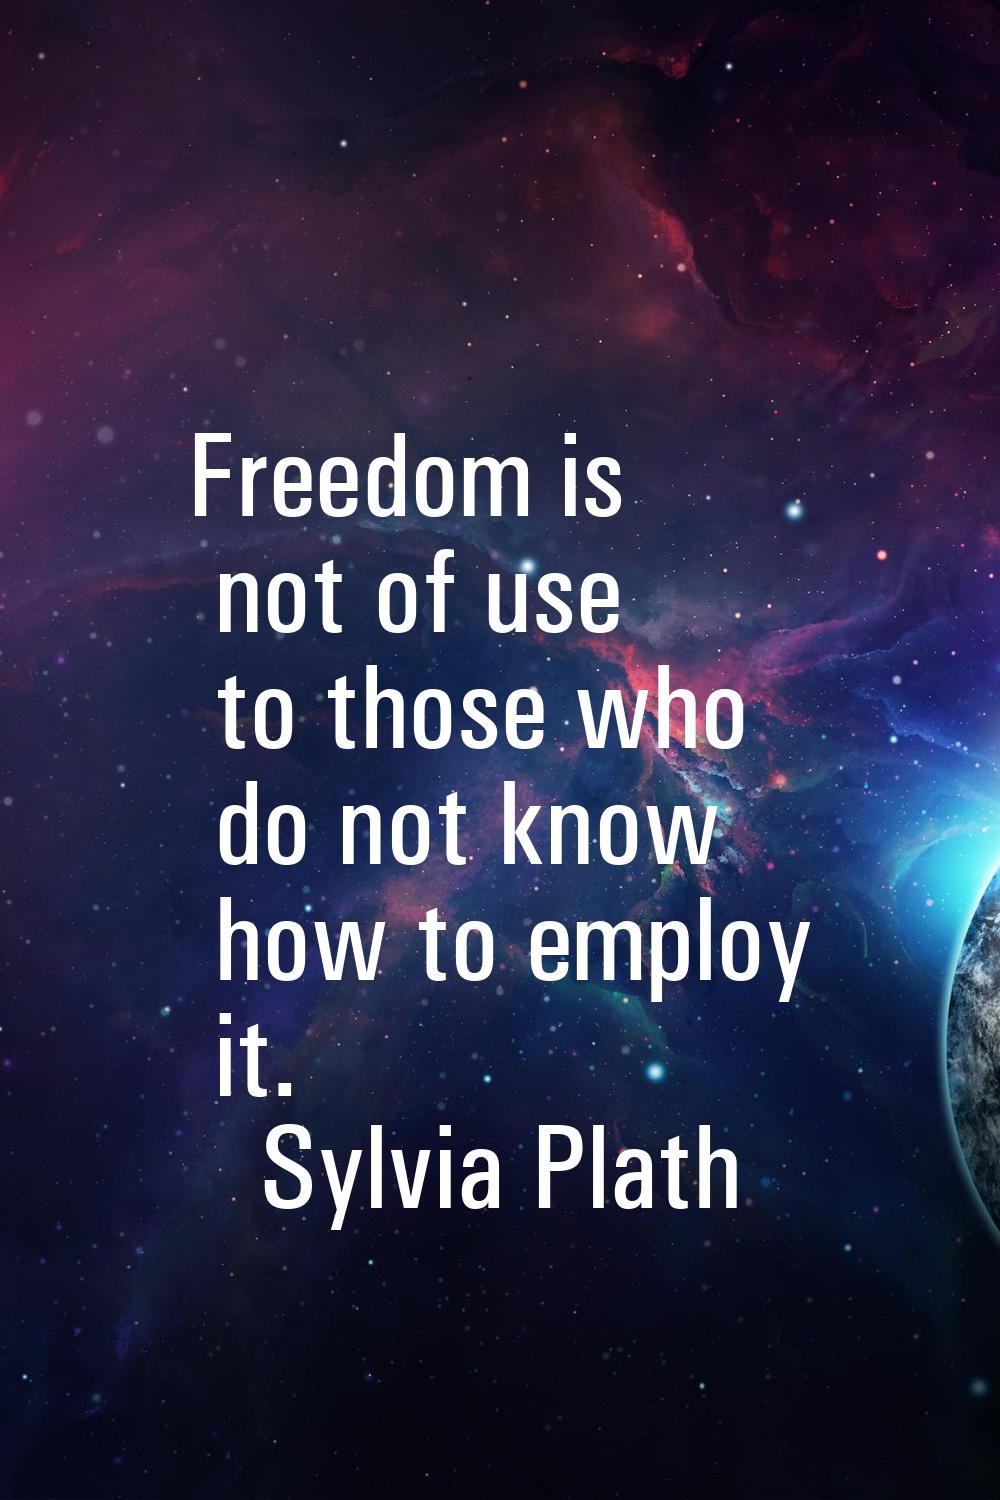 Freedom is not of use to those who do not know how to employ it.